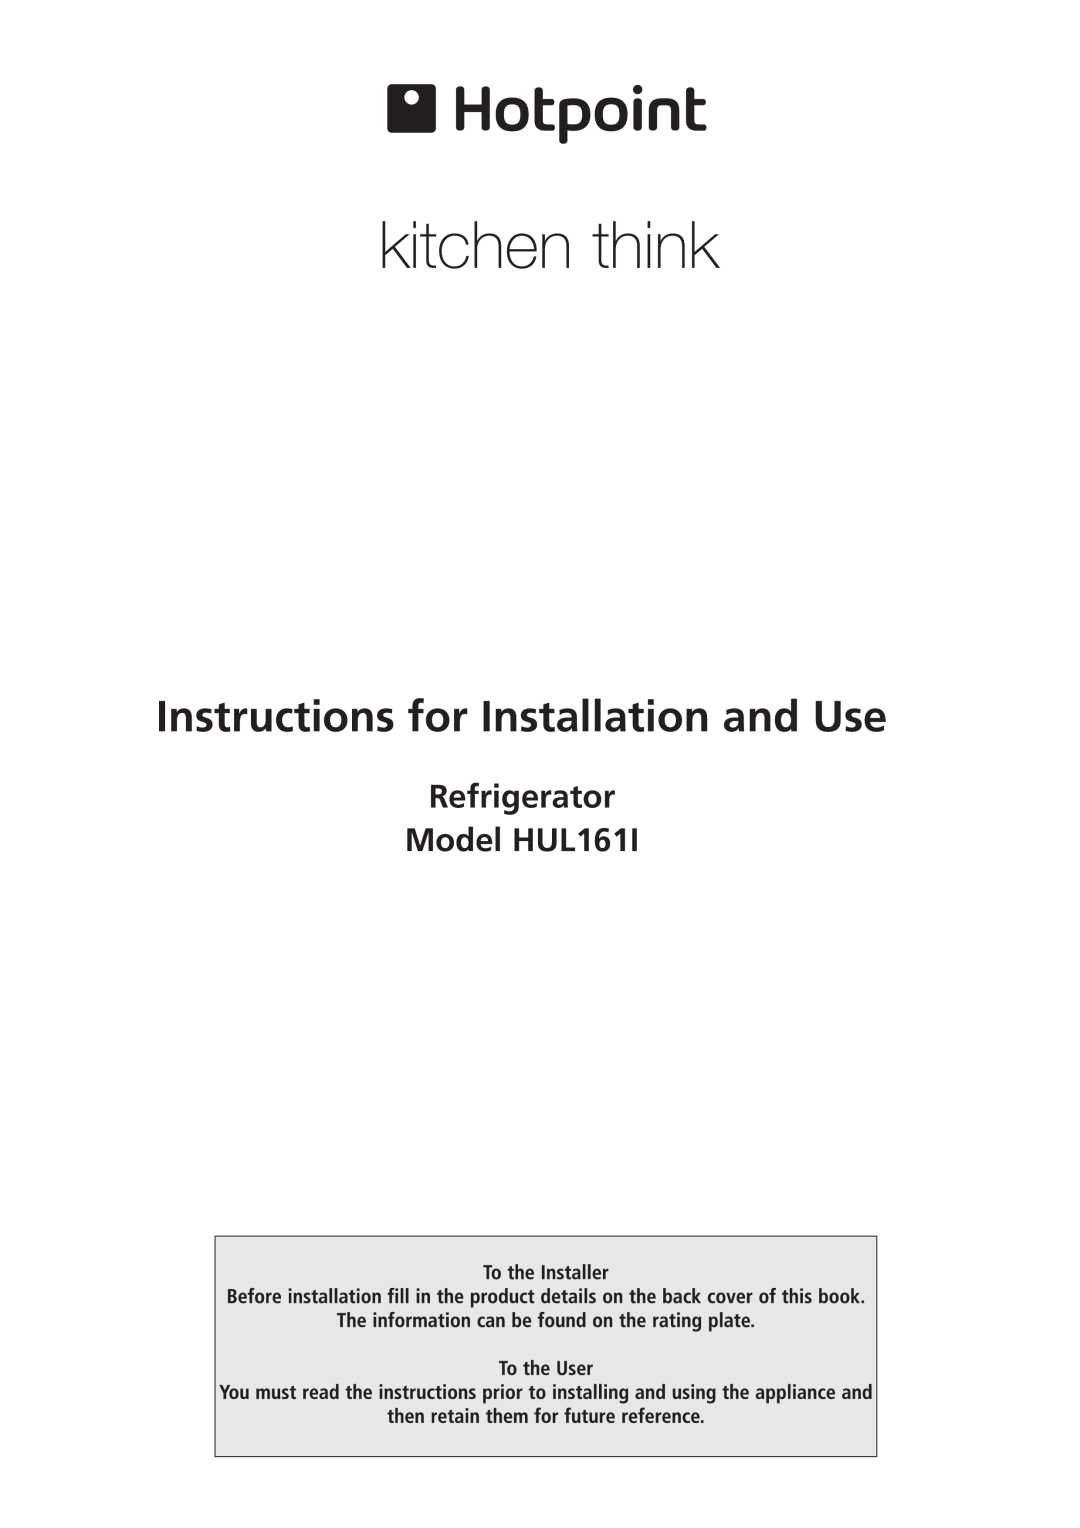 Hotpoint manual Refrigerator Model HUL161I, Instructions for Installation and Use 